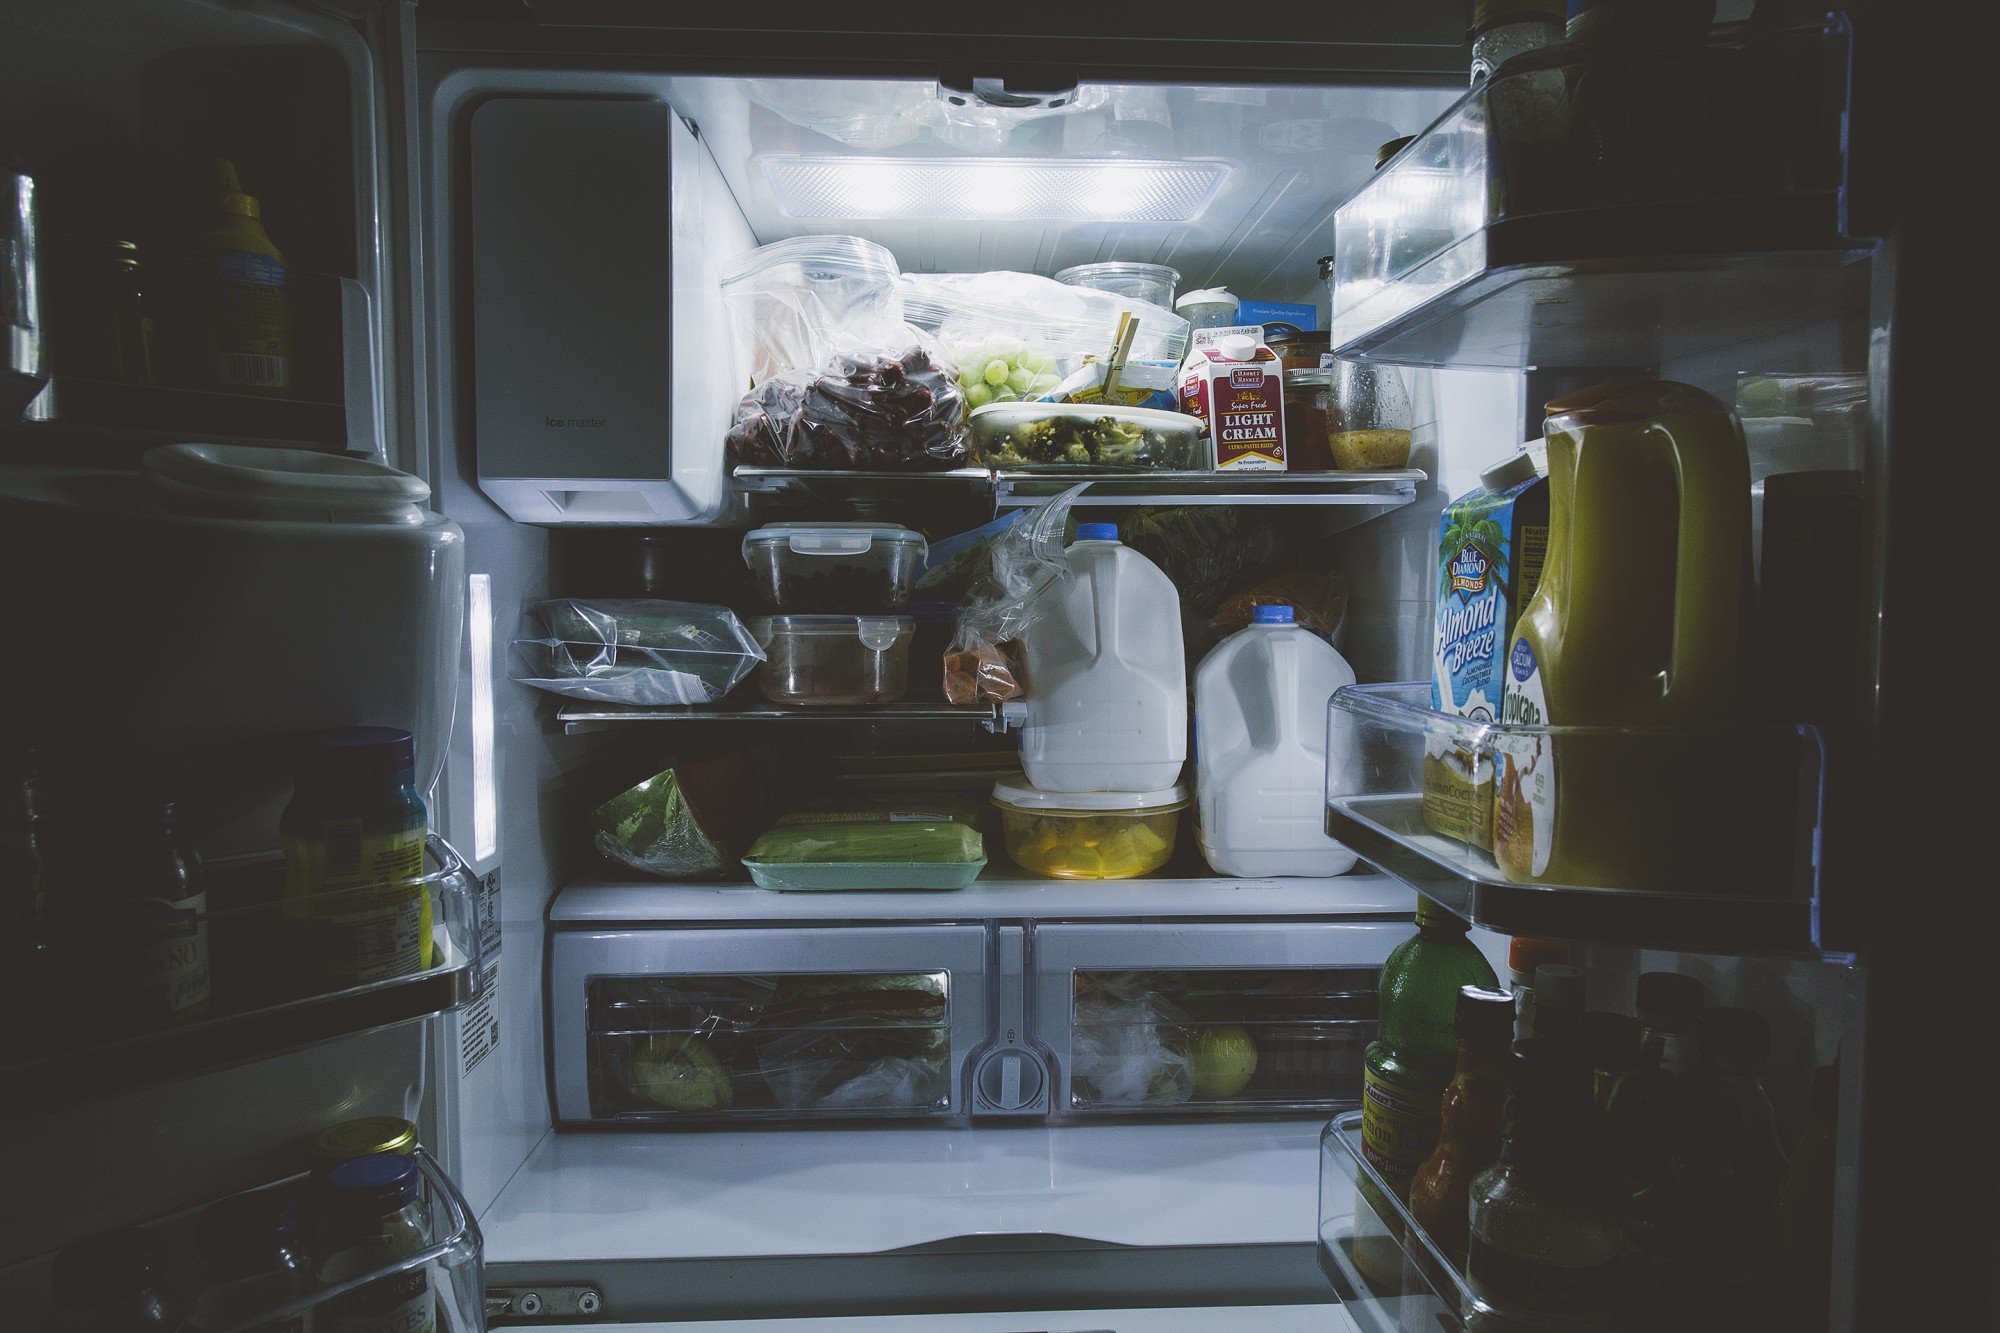 You my wonder what you should do with the food in your refrigerator when the power is out. Get your power outage refrigerator food safety guide here.